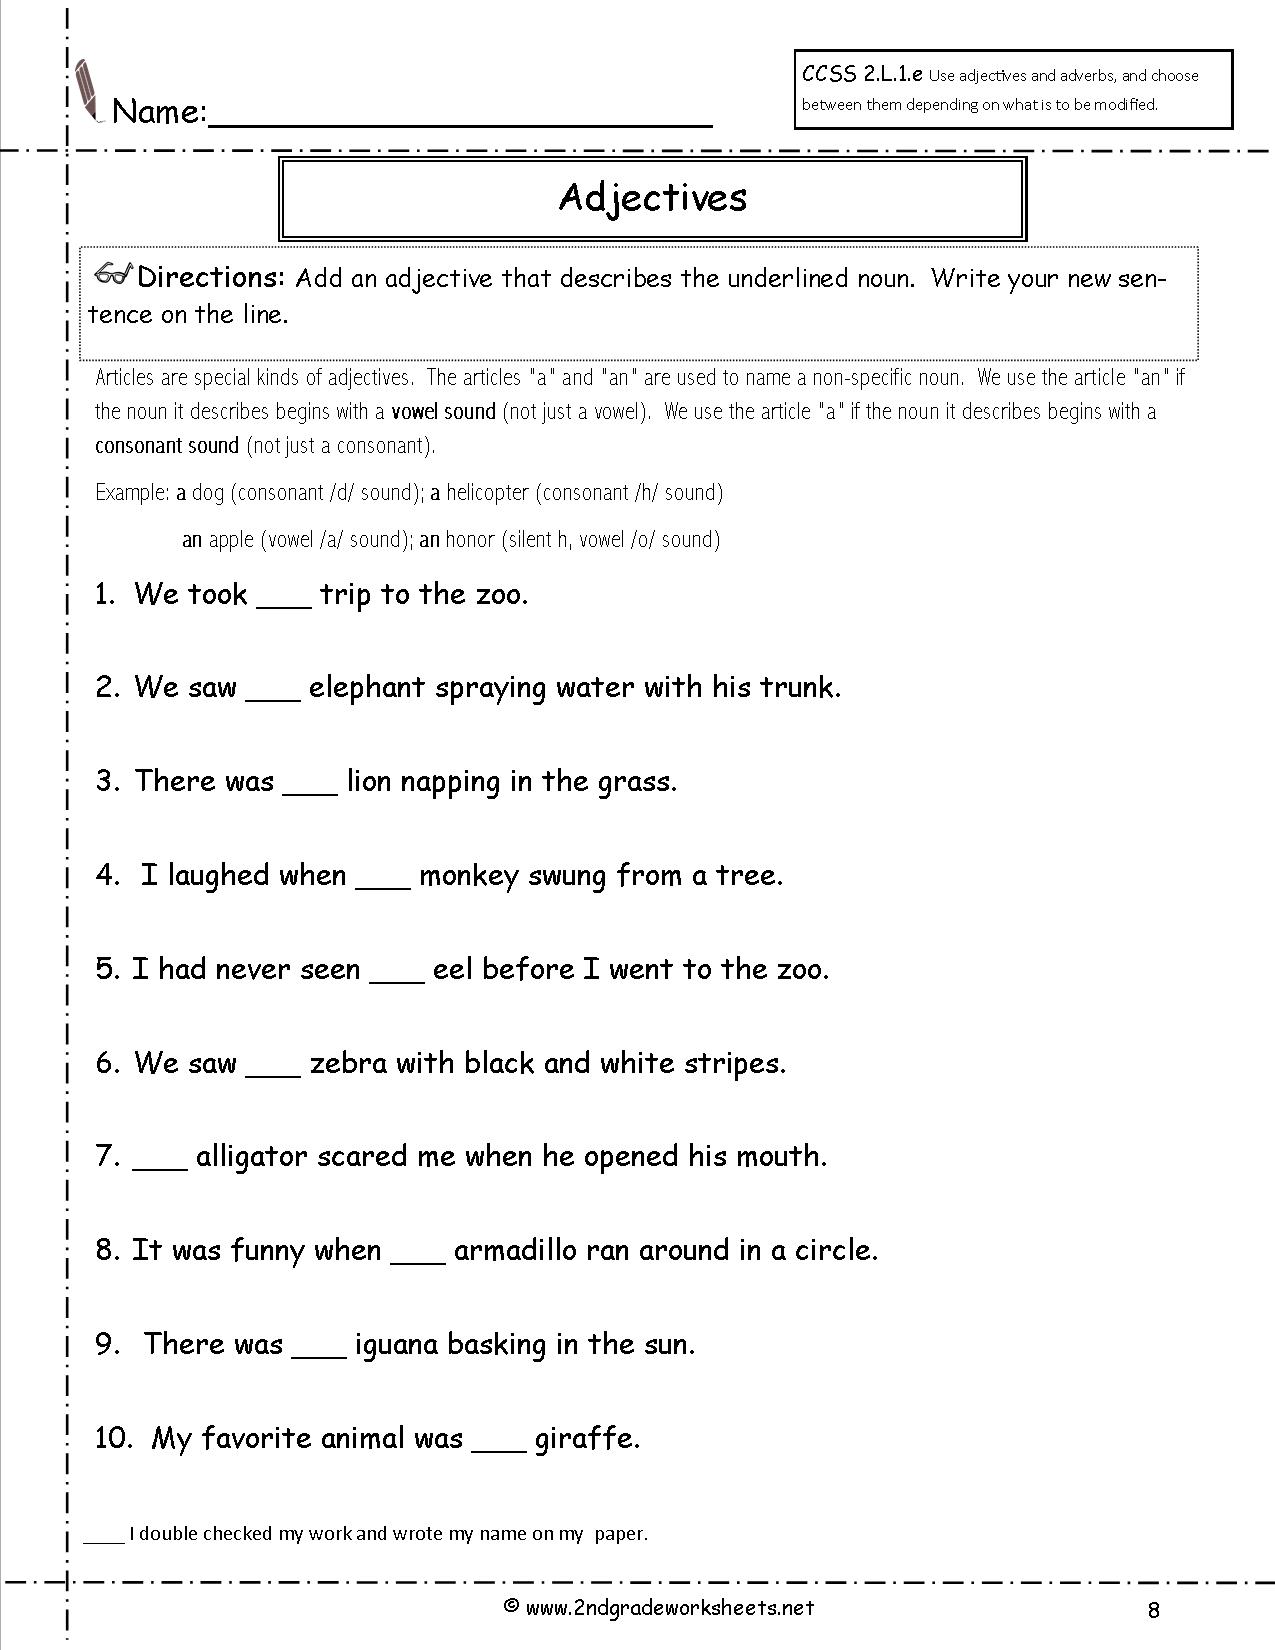 3rd-grade-adverb-worksheets-with-answer-key-worksheet-resume-examples